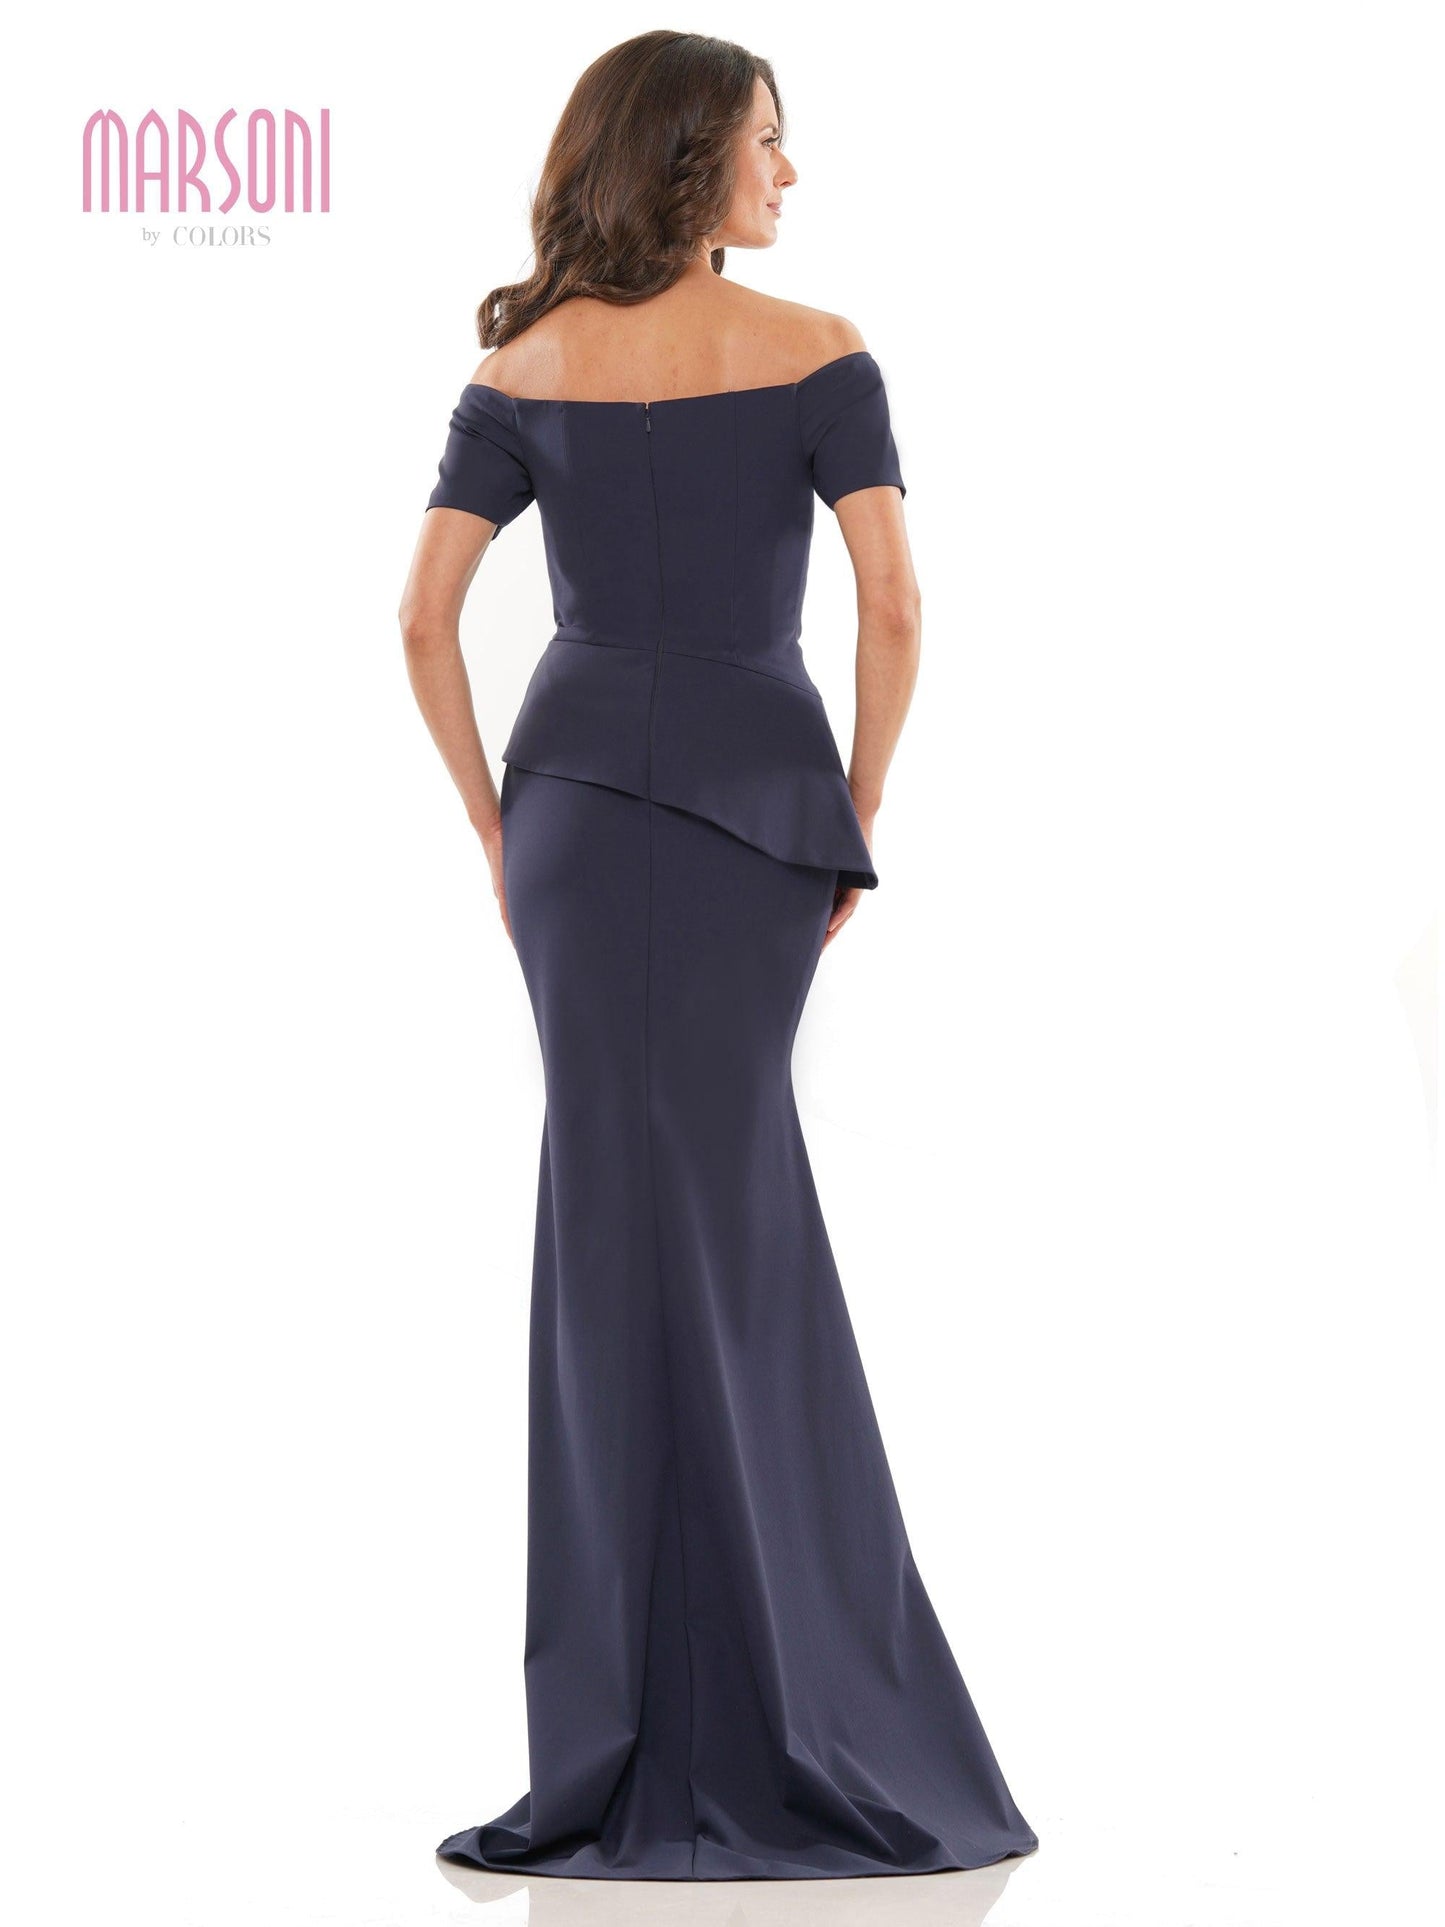 Marsoni Long Off Shoulder Fitted Formal Gown 1163 - The Dress Outlet